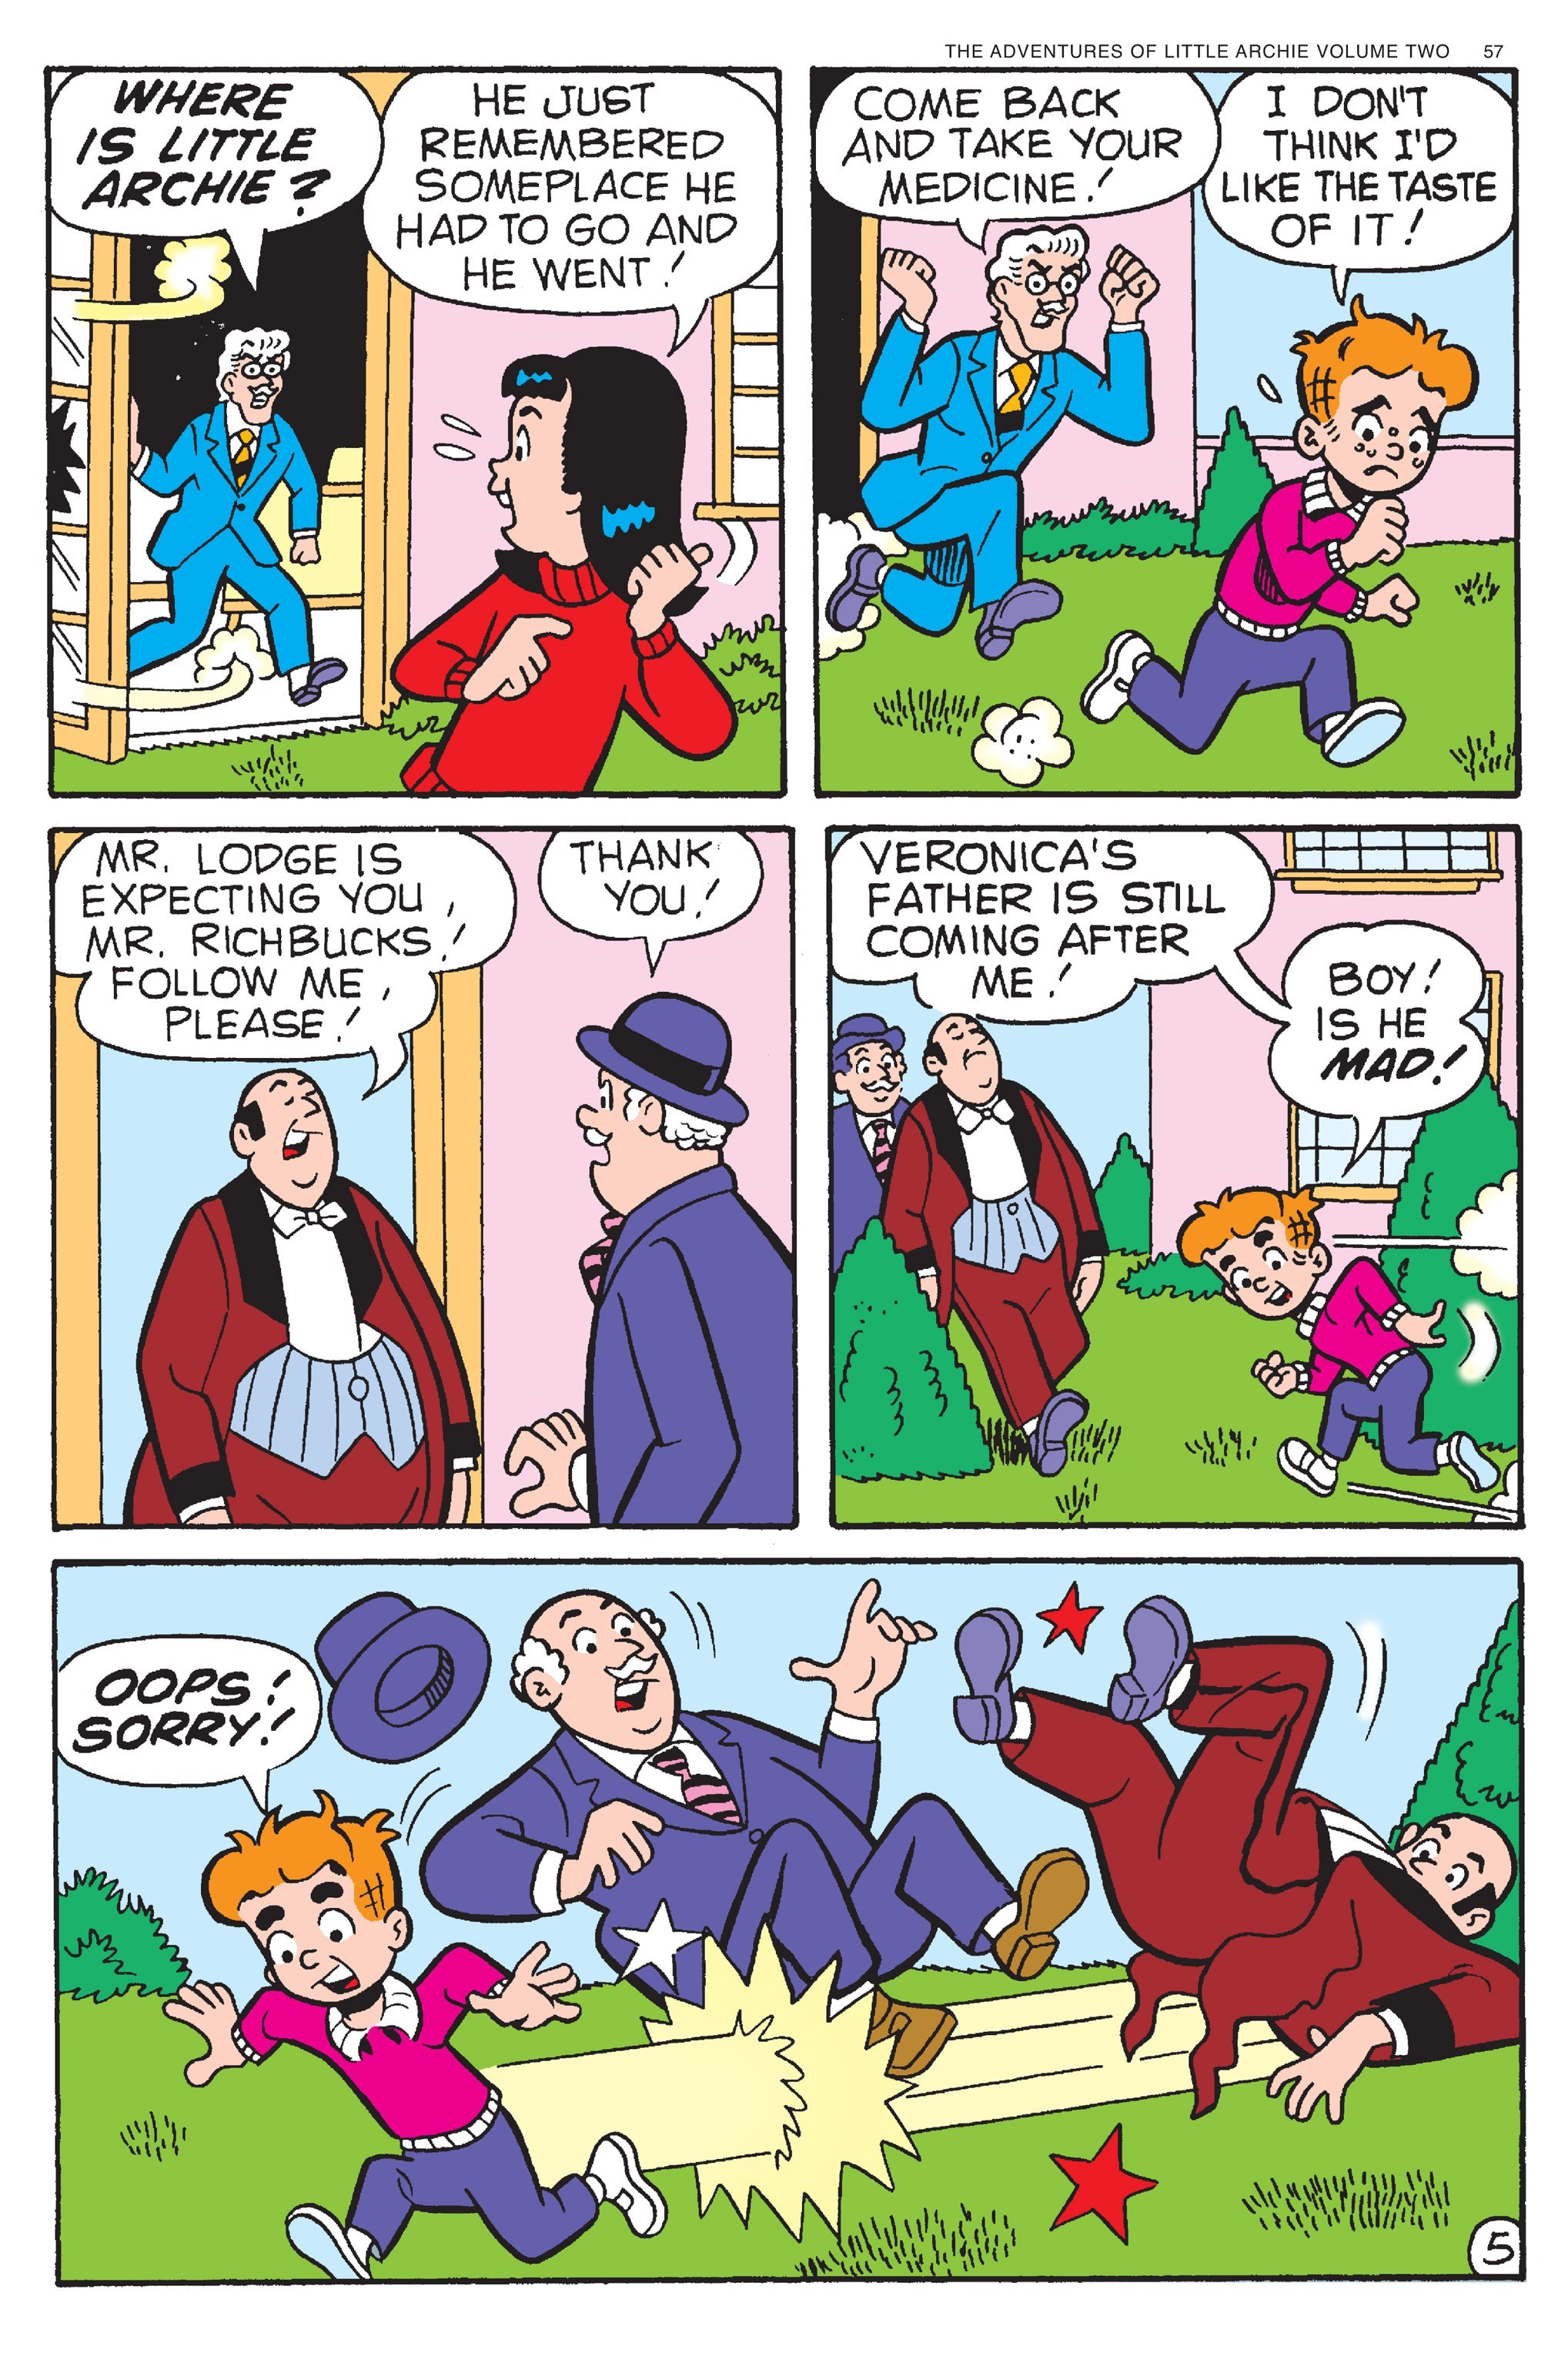 Read online Adventures of Little Archie comic -  Issue # TPB 2 - 58